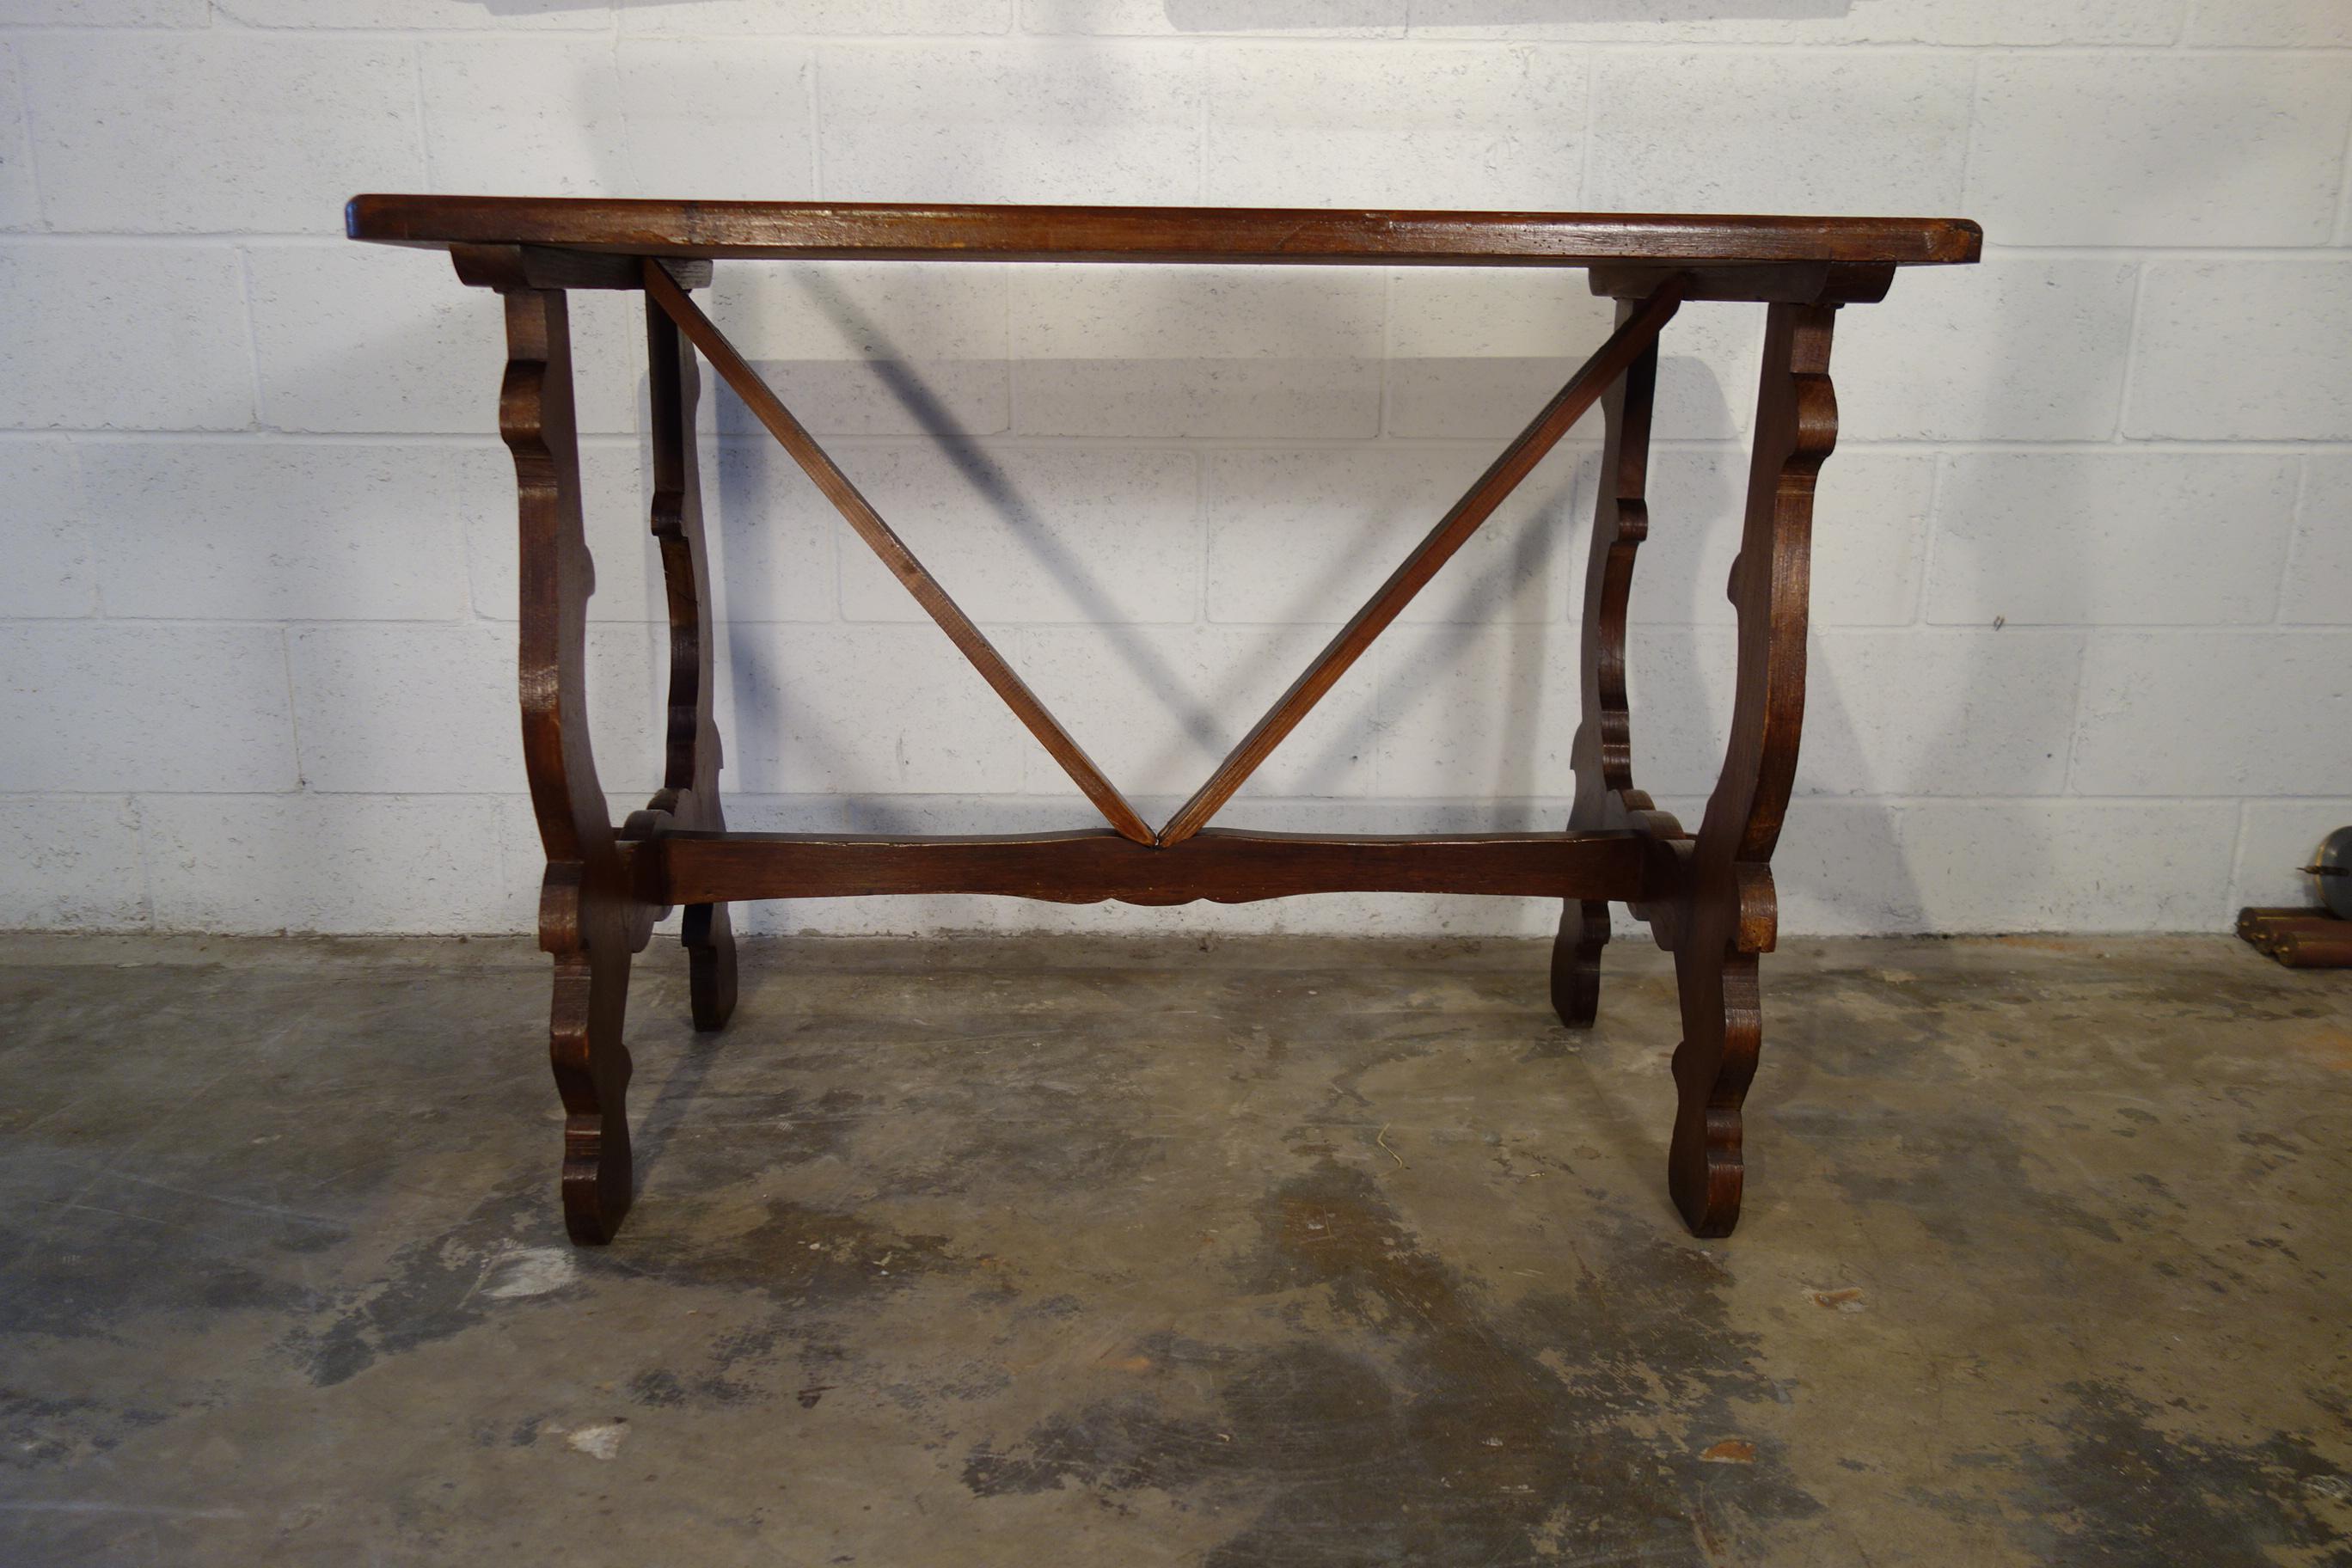 Hand-Crafted Antique Italian Tuscan Renaissance Refectory Style Hand Crafted Oak Farm Table For Sale